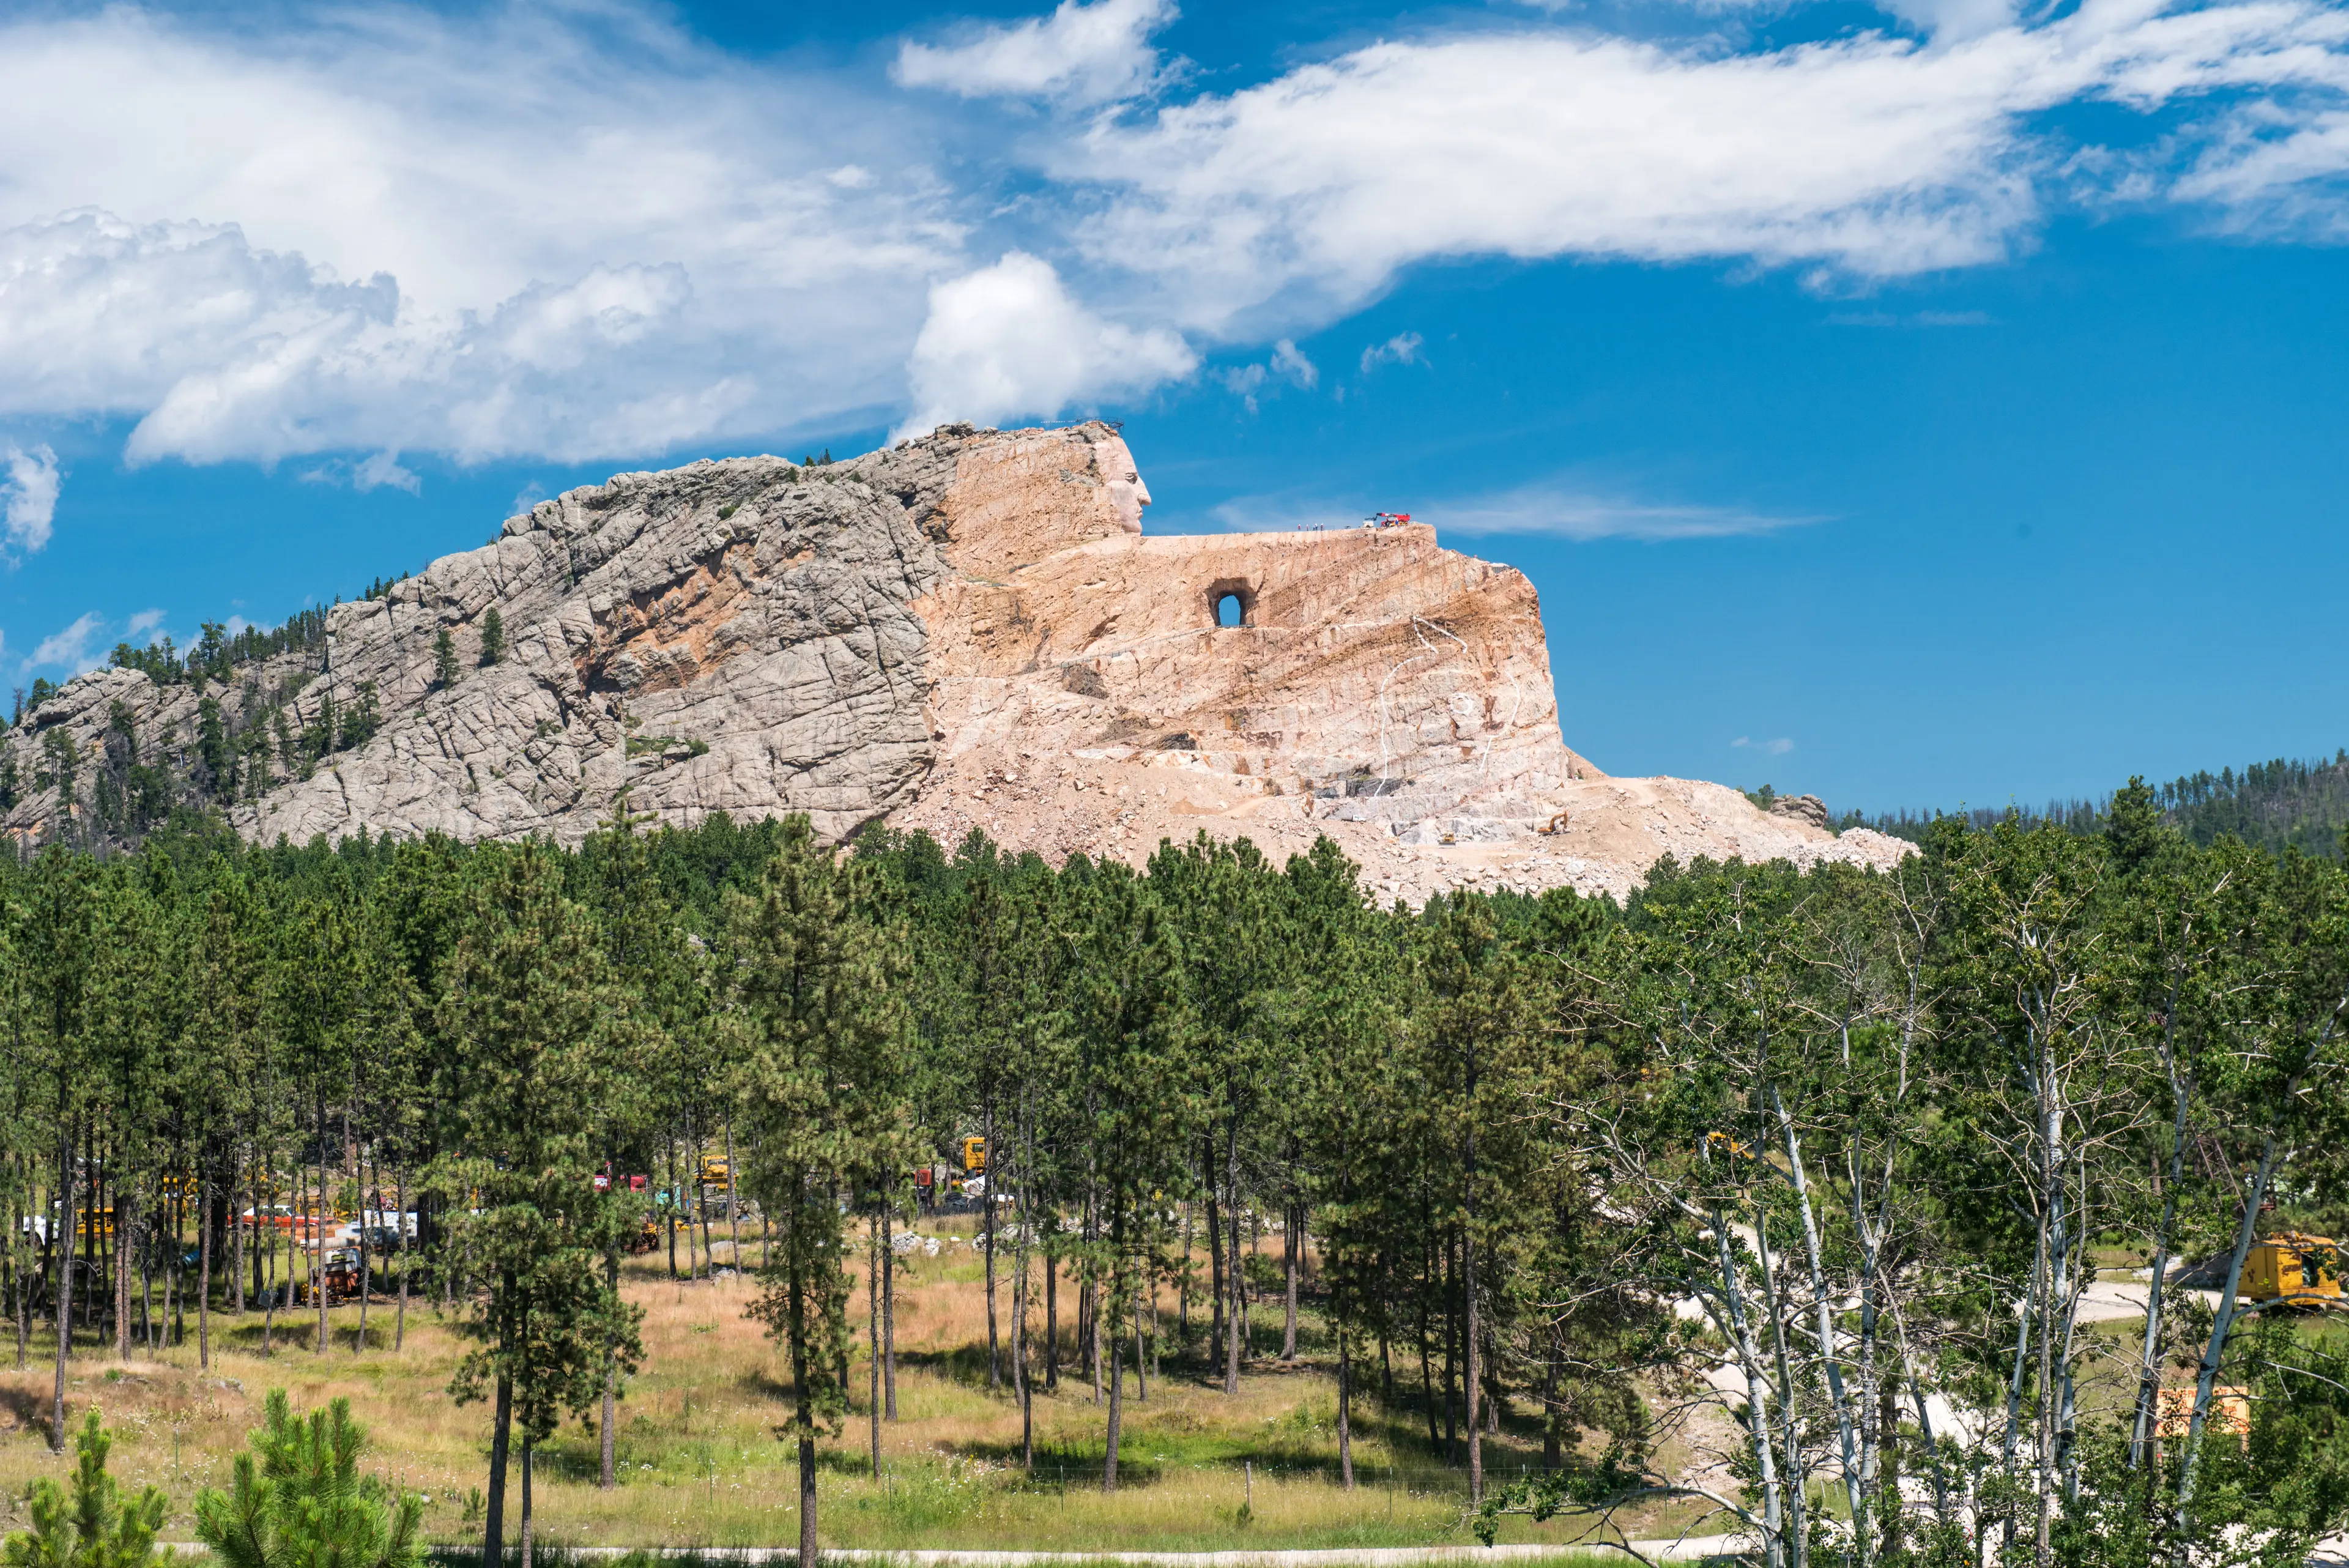 4-Day Family Adventure and Sightseeing in The Black Hills